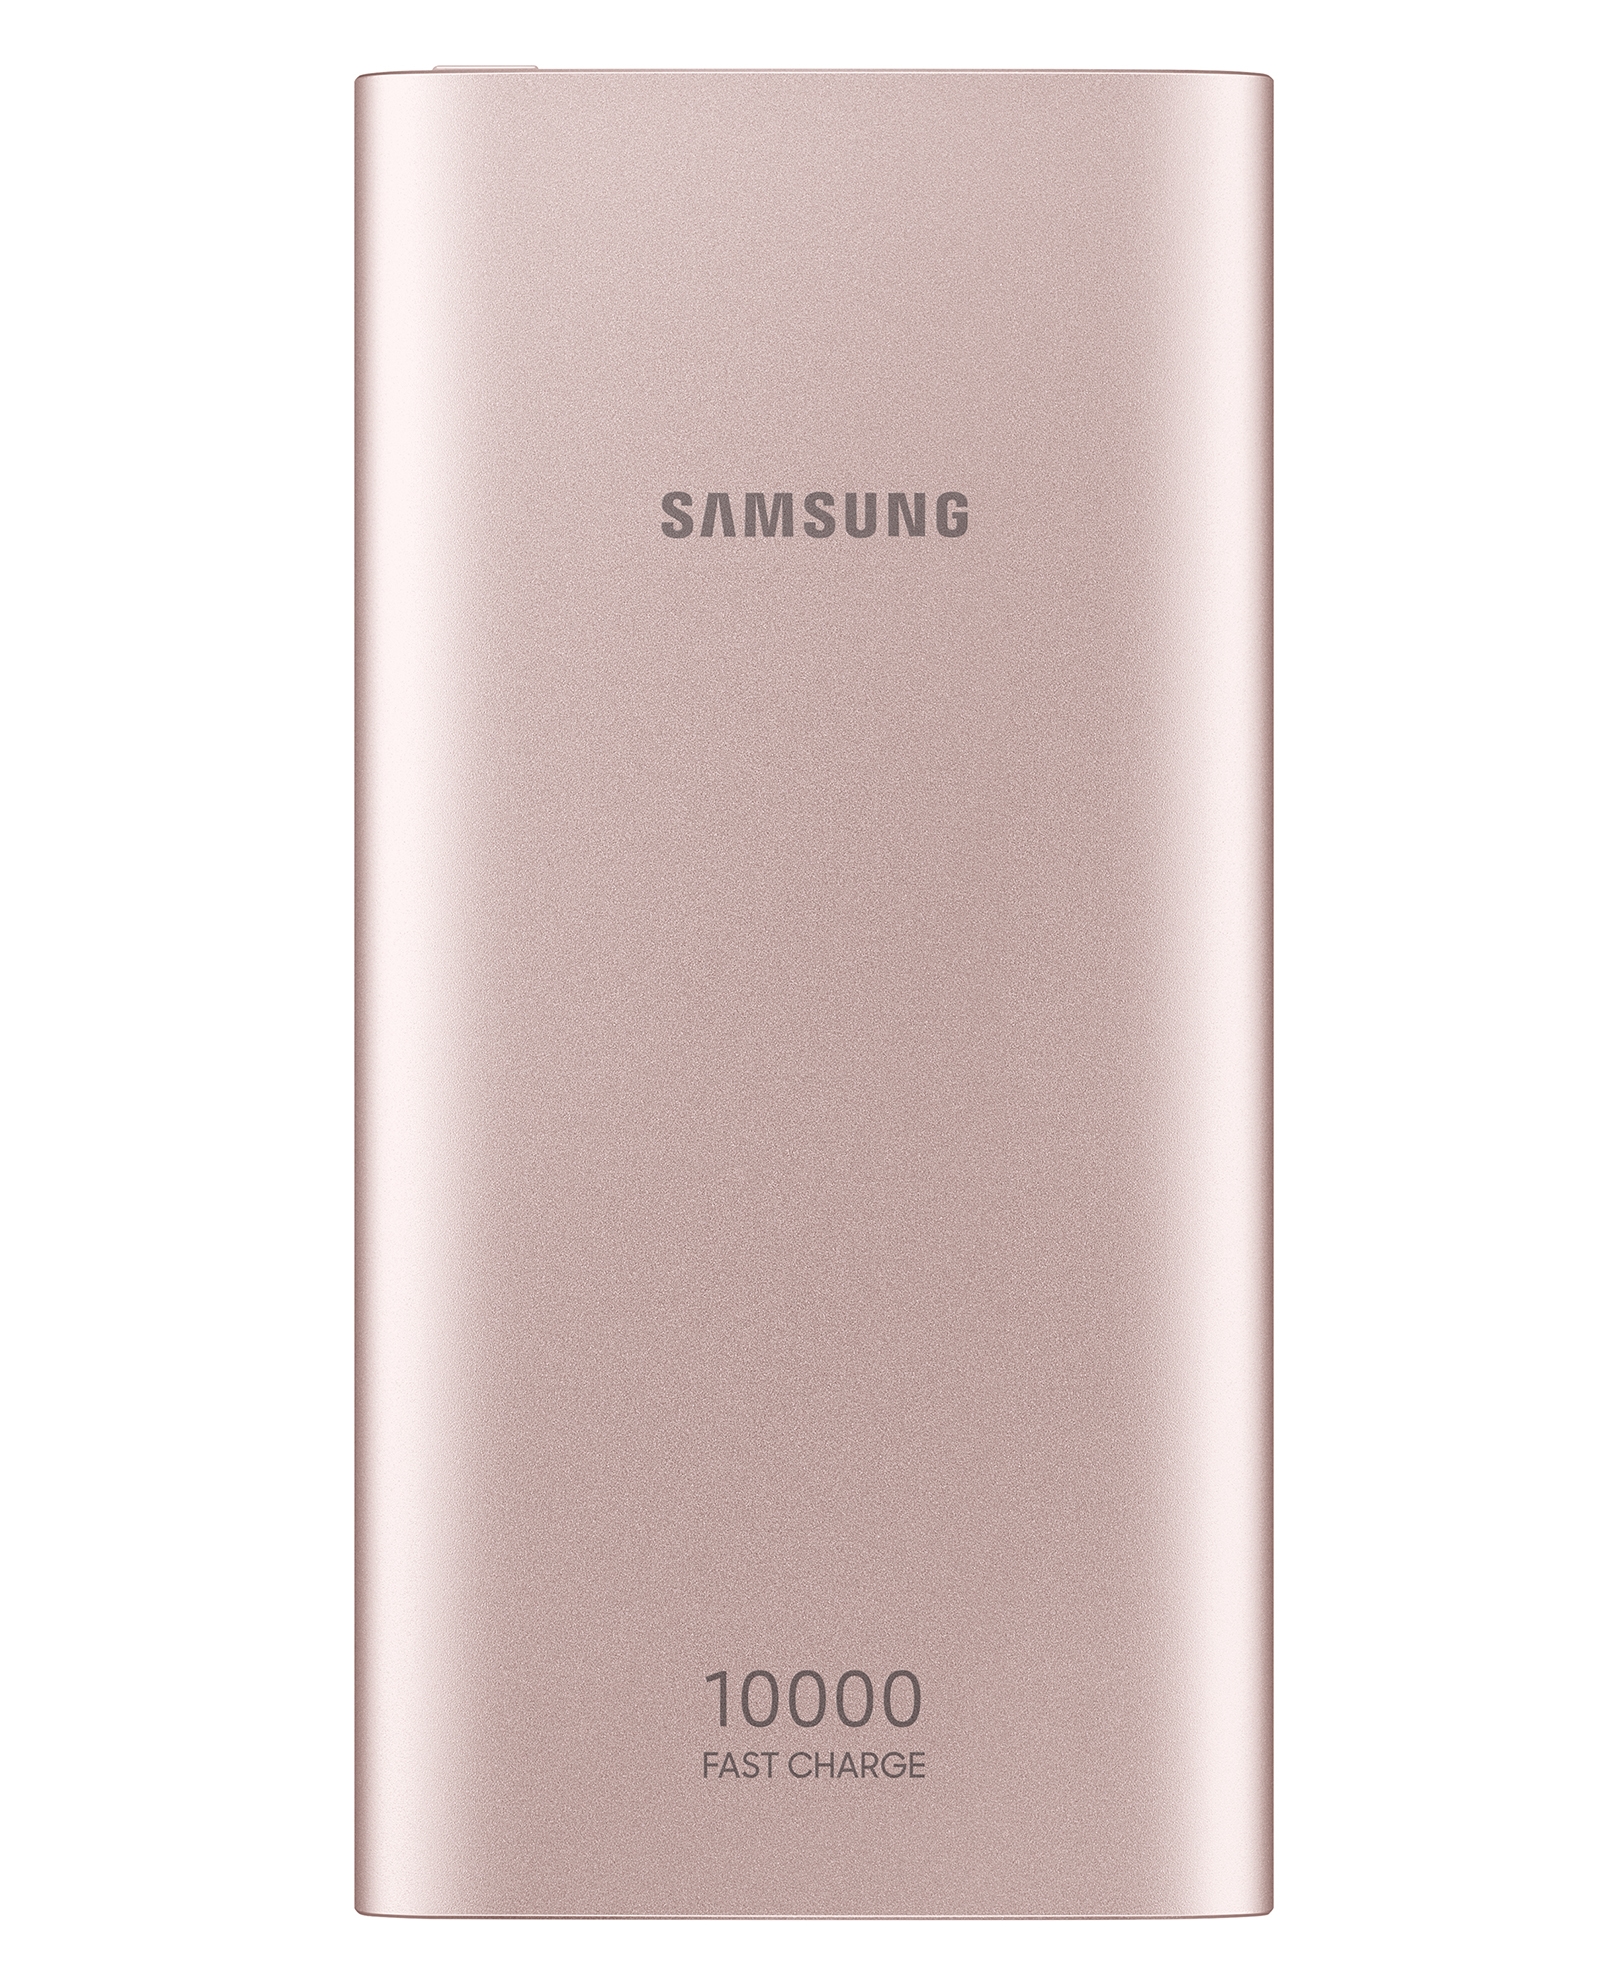 Thumbnail image of 10,000 mAh Portable Battery with USB-C Cable, Pink